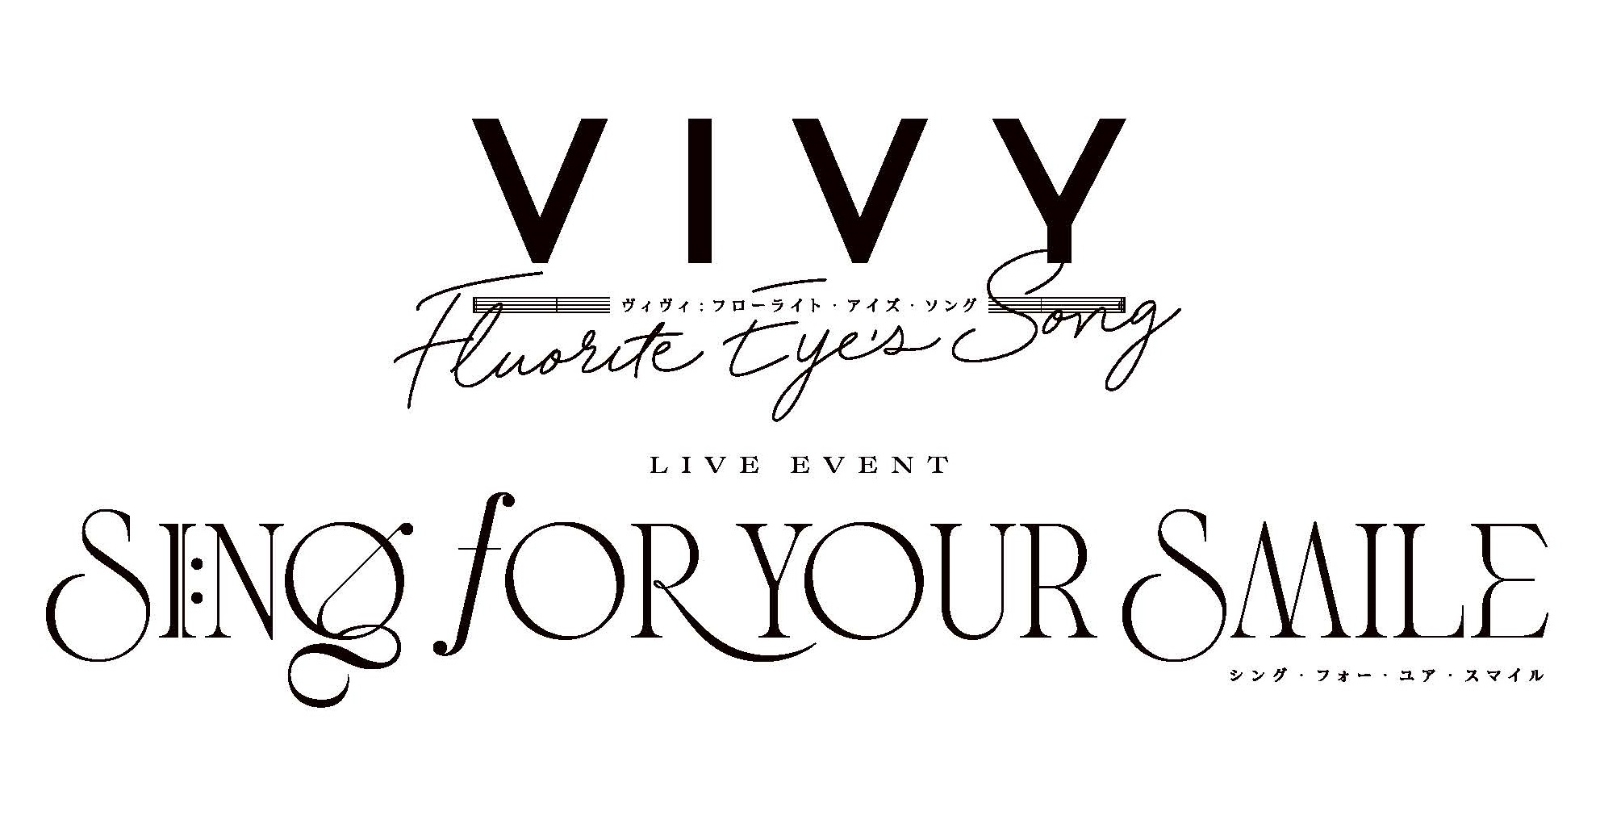 Vivy -Fluorite Eye's Song- Live Event ～Sing for Your Smile～【完全生産限定版】【Blu-ray】 [ 八木海莉 ]画像